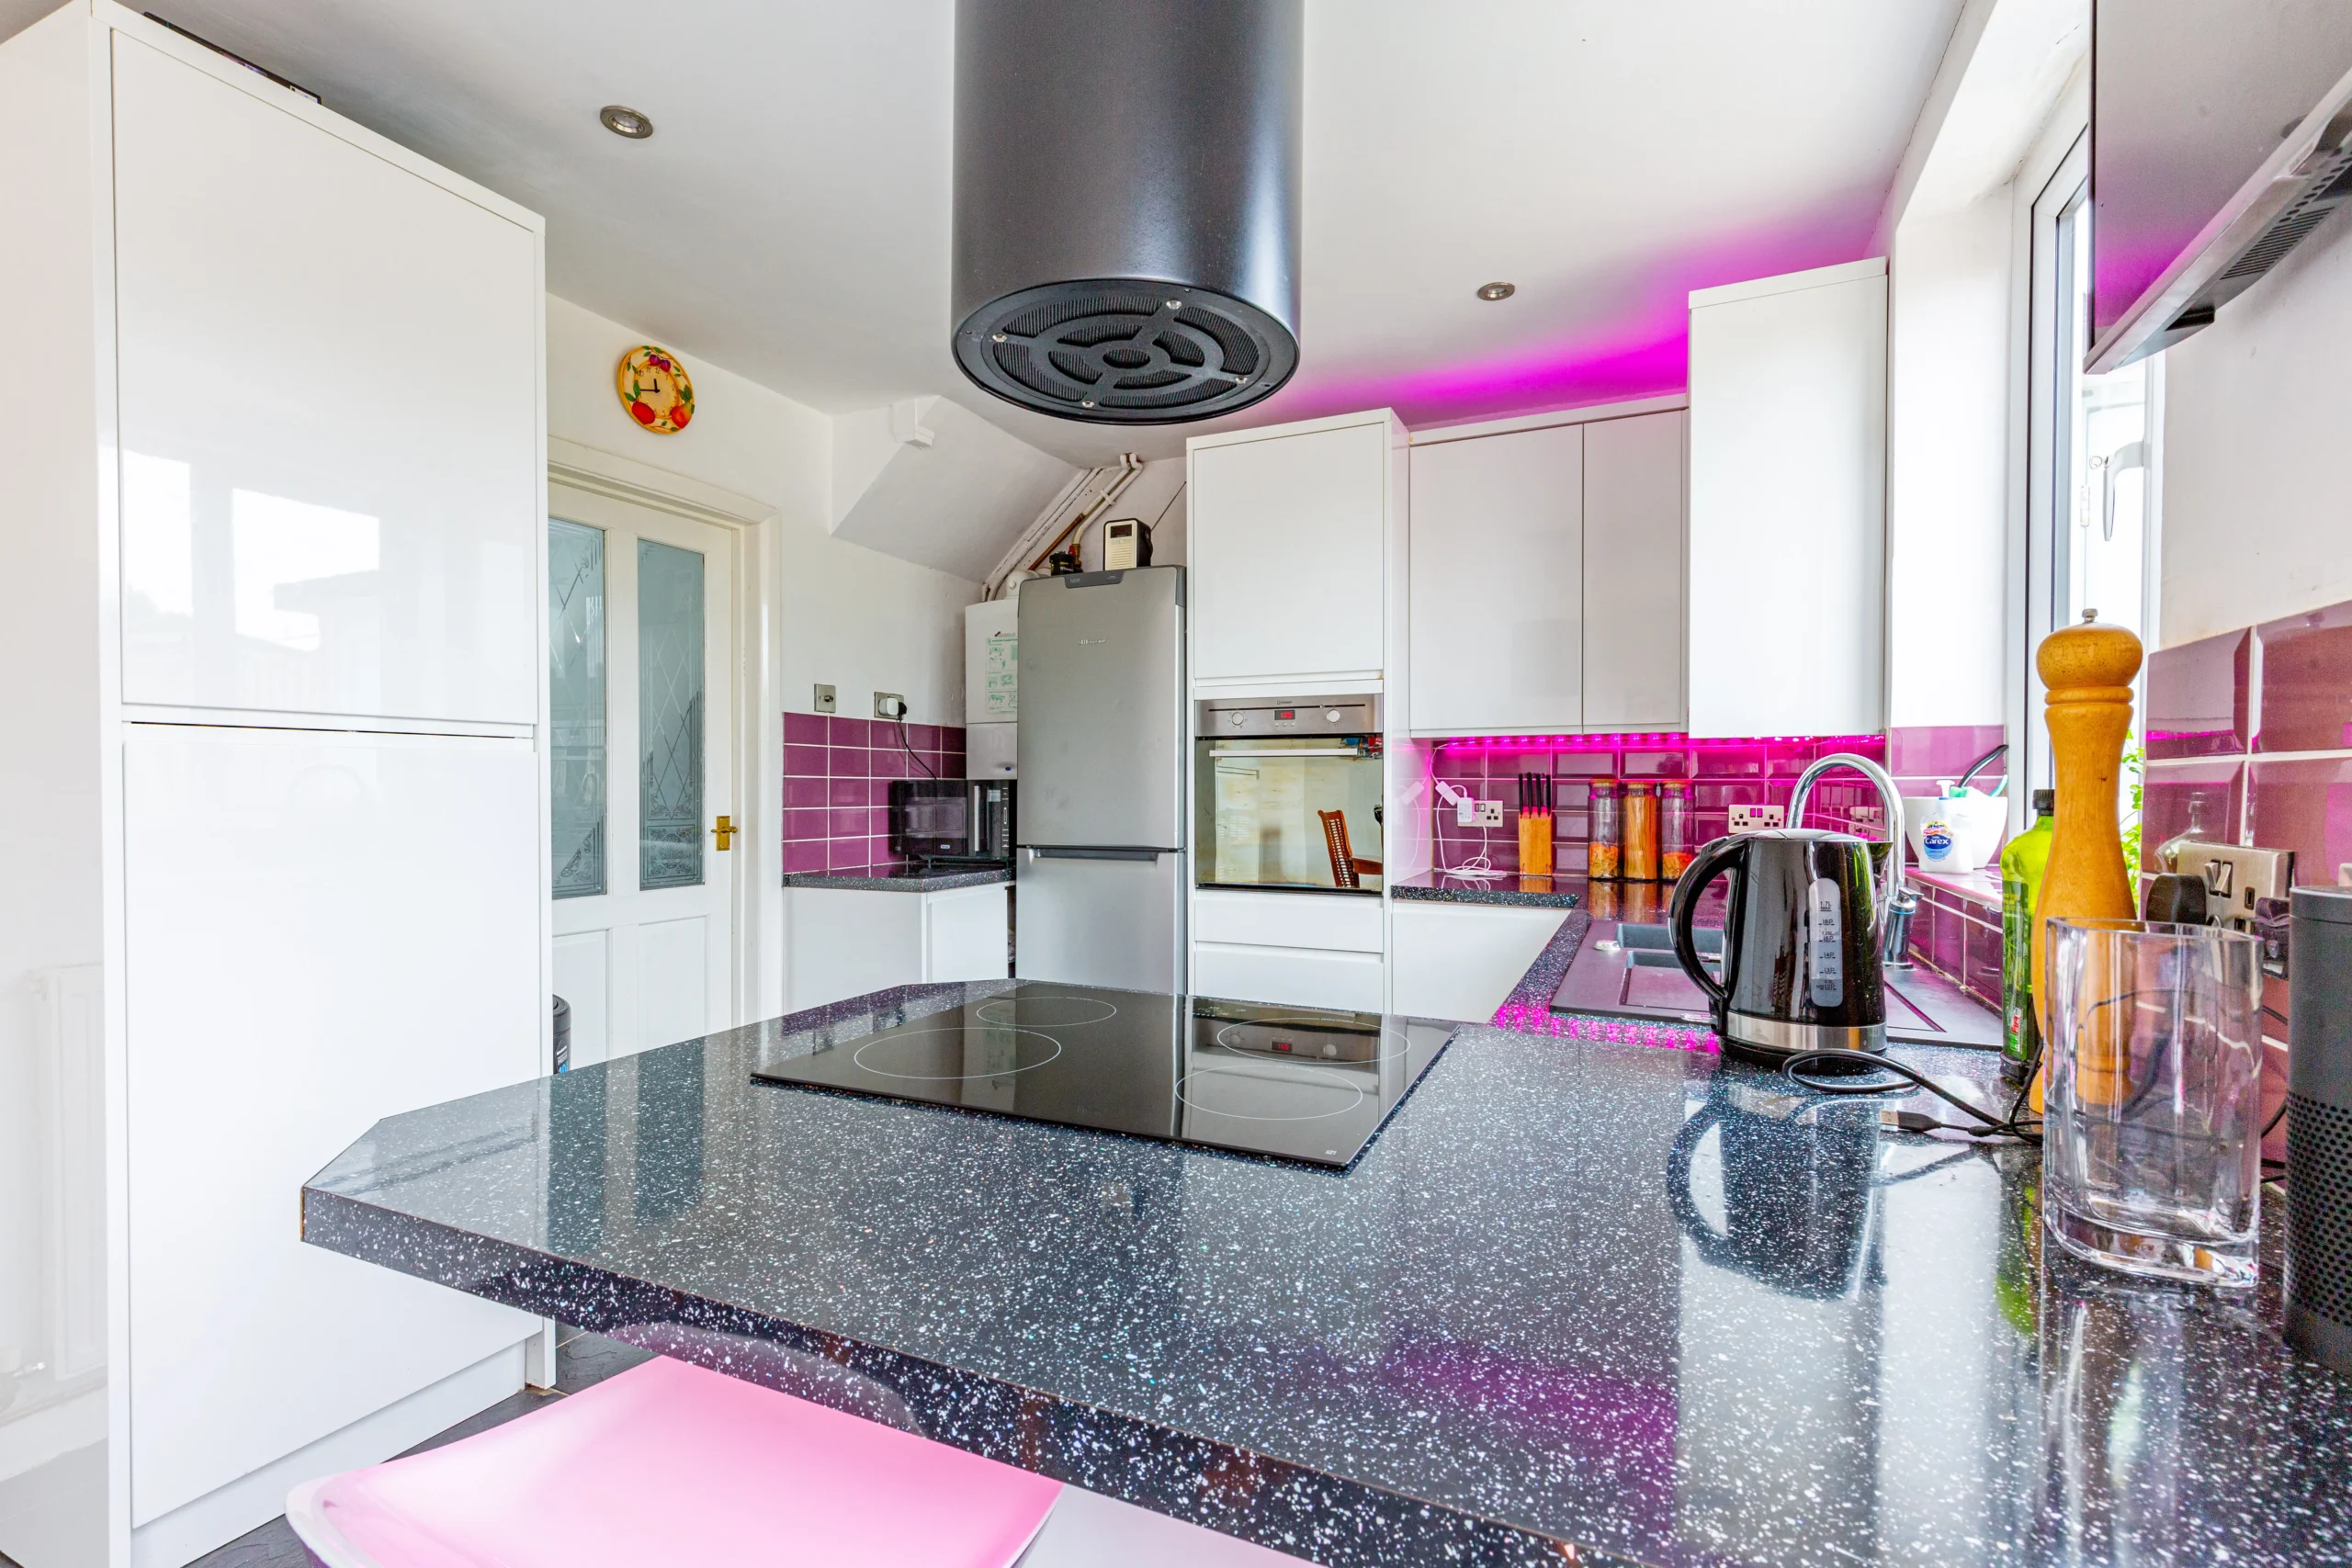 A pink, glittery urban kitchen with modern appliances and sleek countertops.